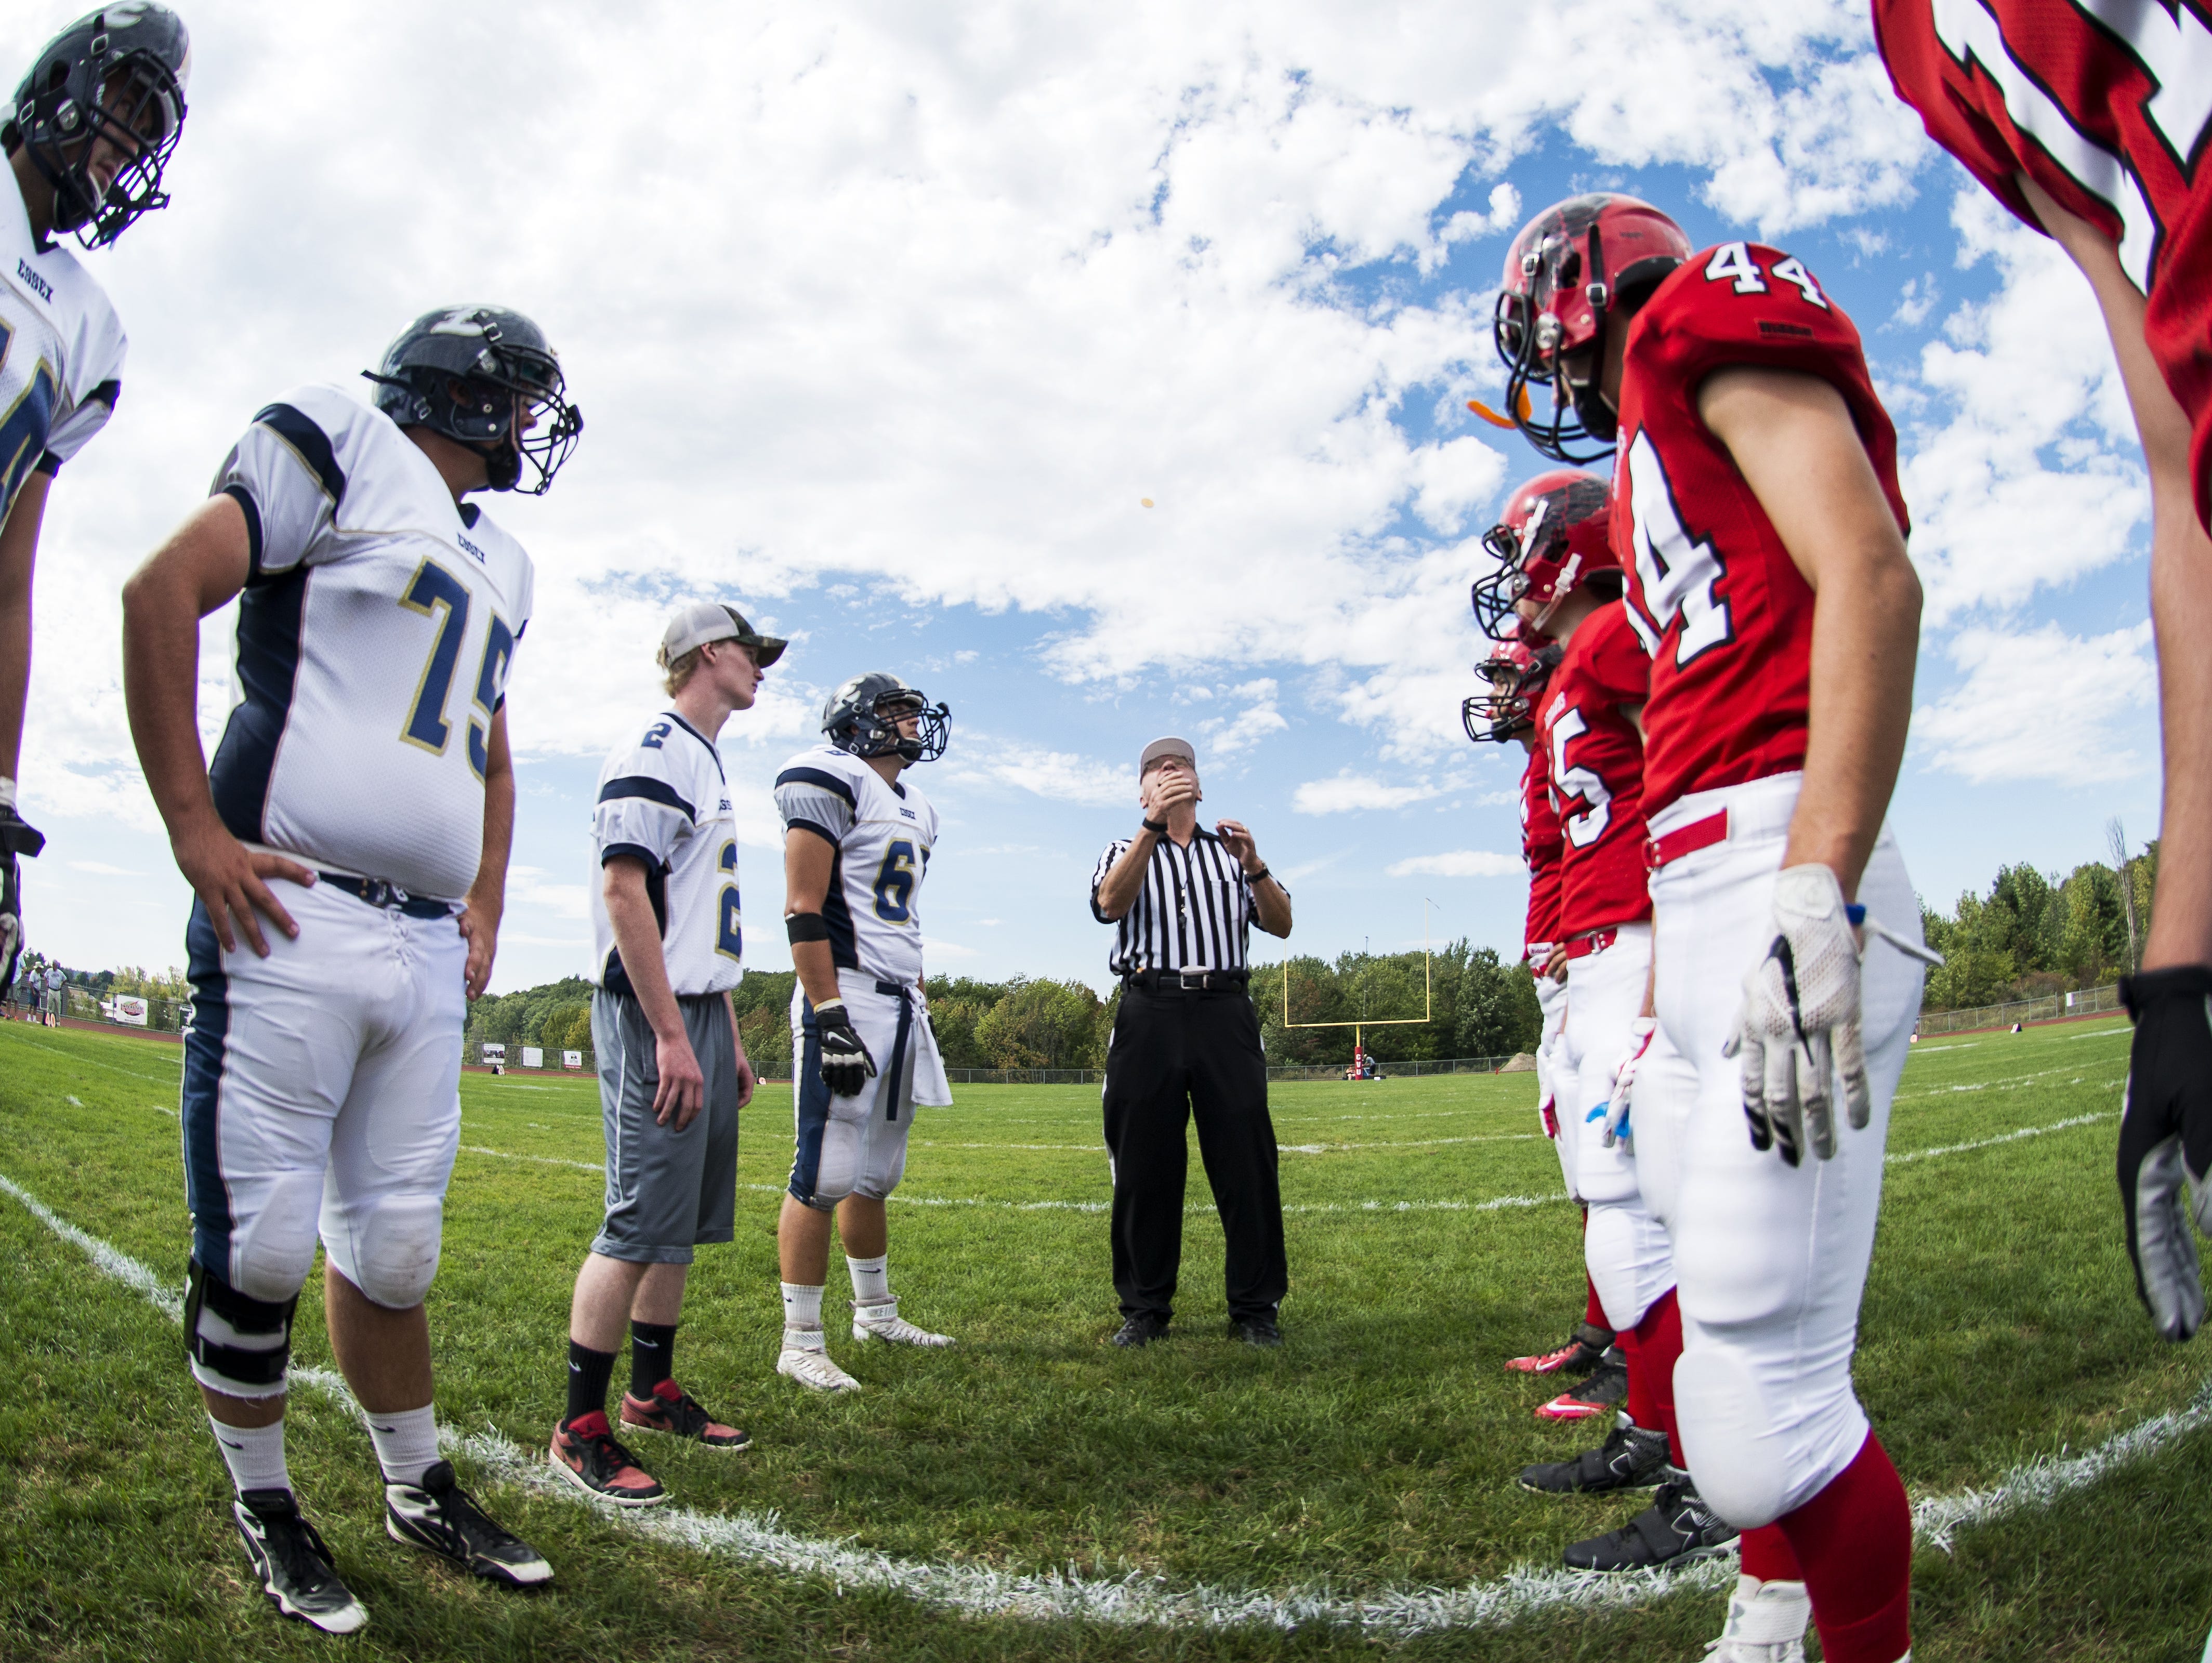 The referee fills a coin before the start of the high school football game between the Essex Hornets and the Champlain Valley Union Redhawks on Saturday afternoon.